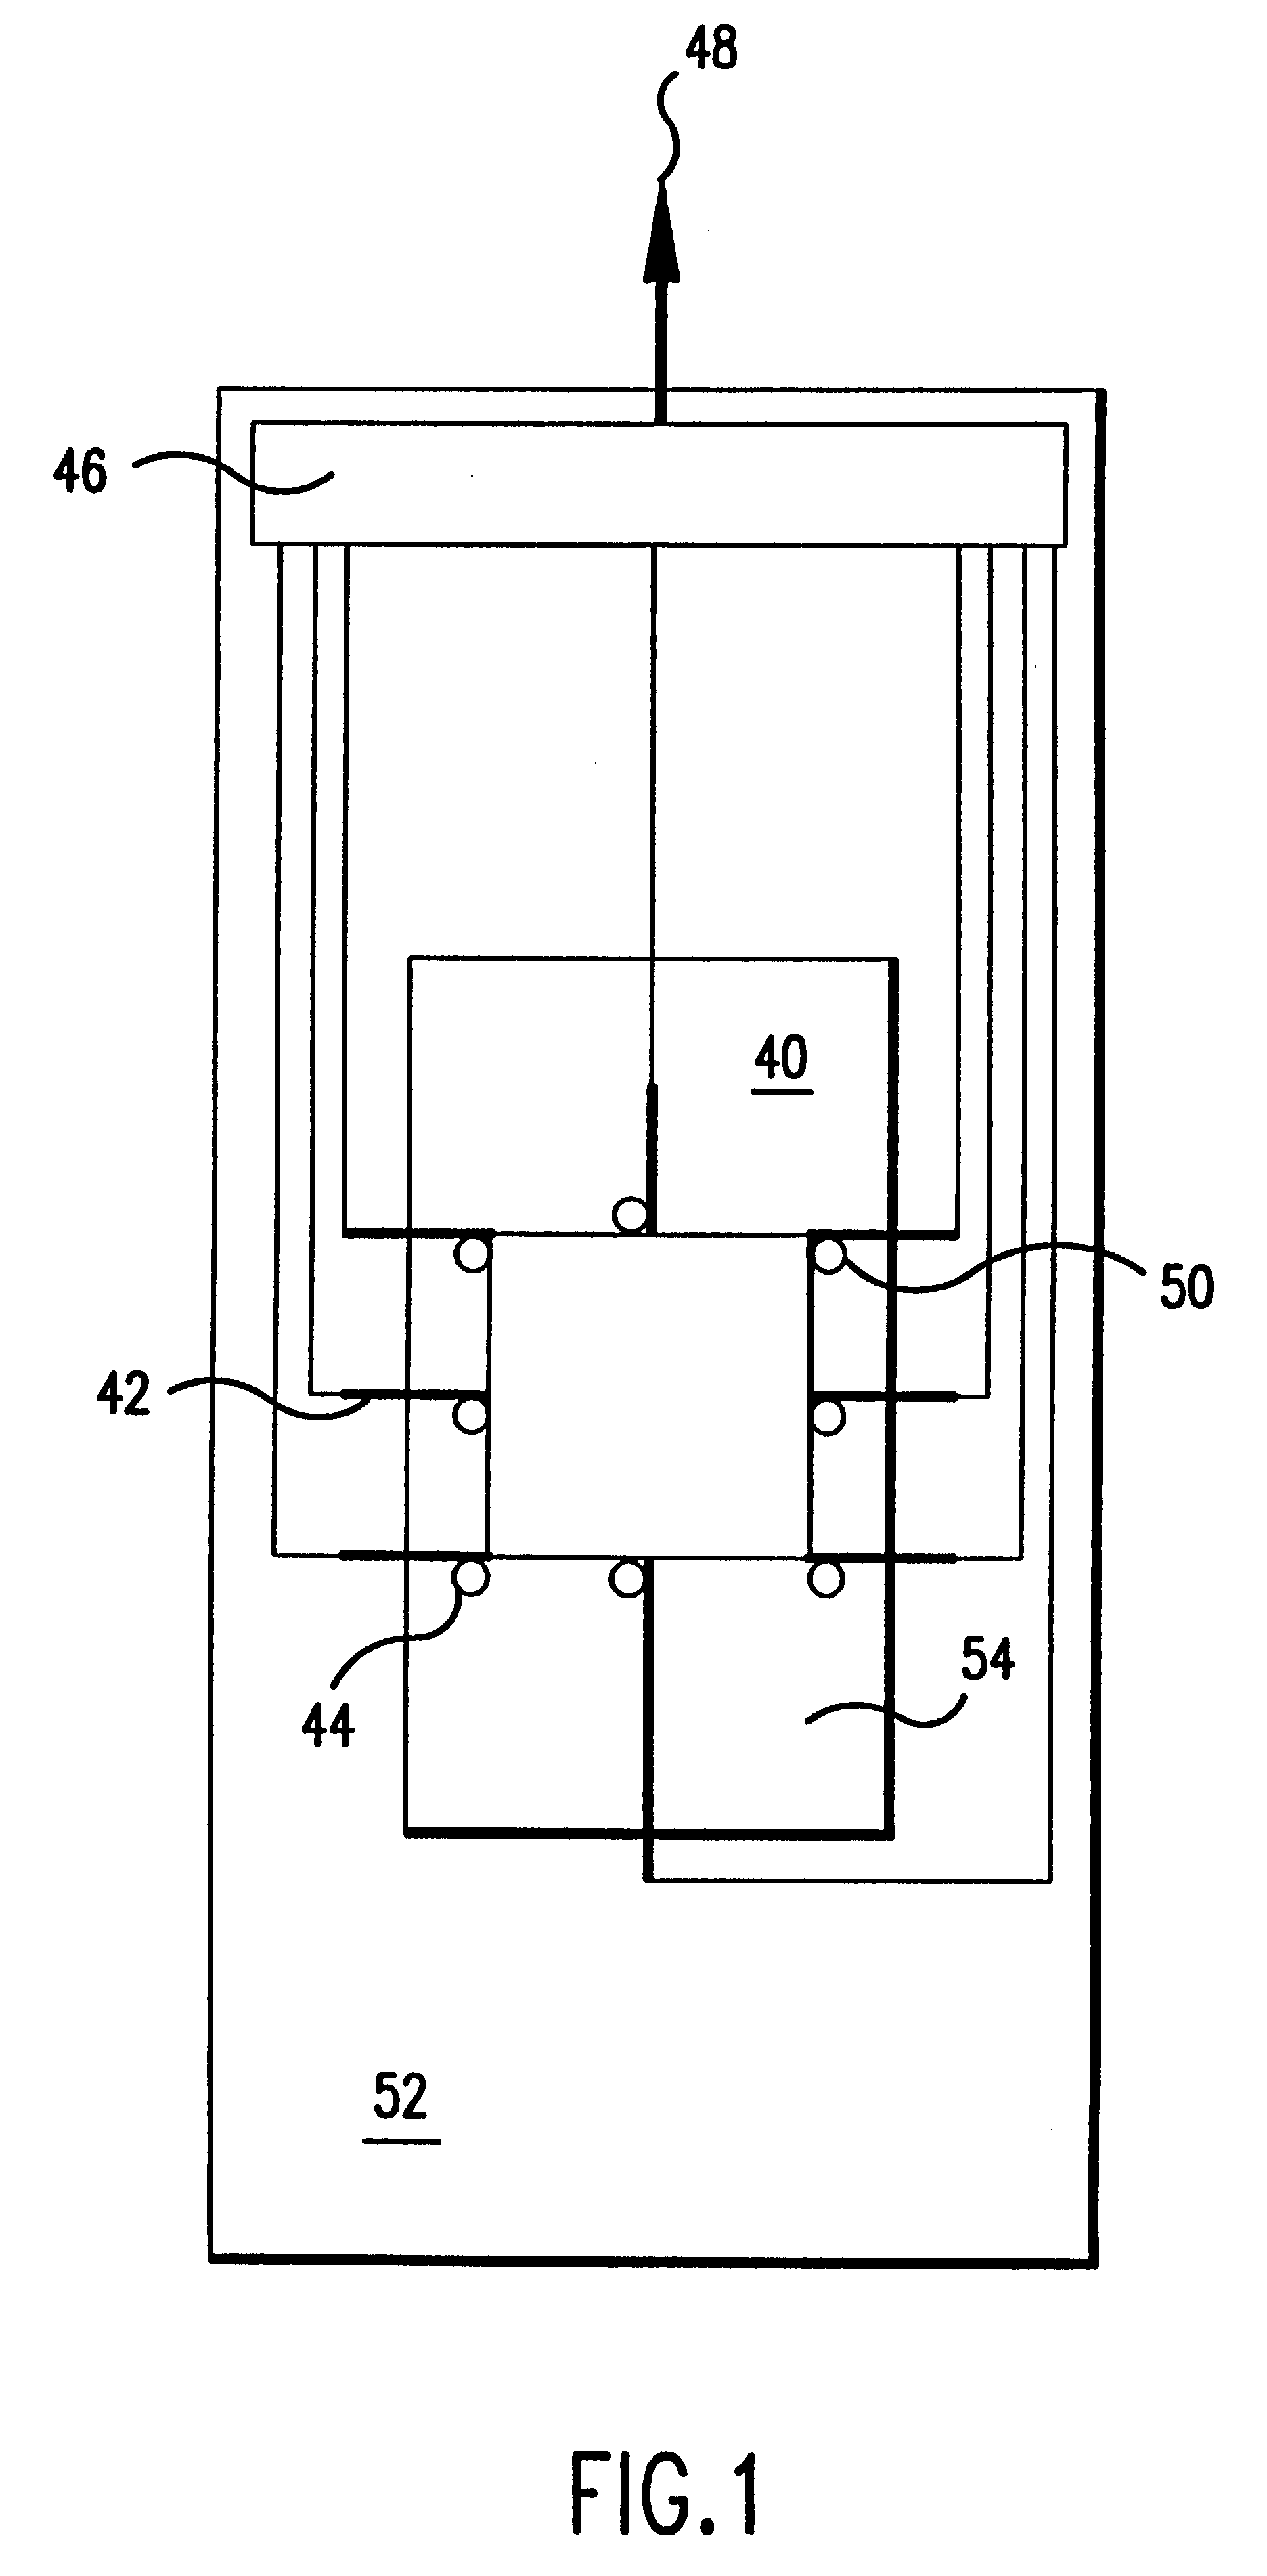 Image processing and analysis of individual nucleic acid molecules